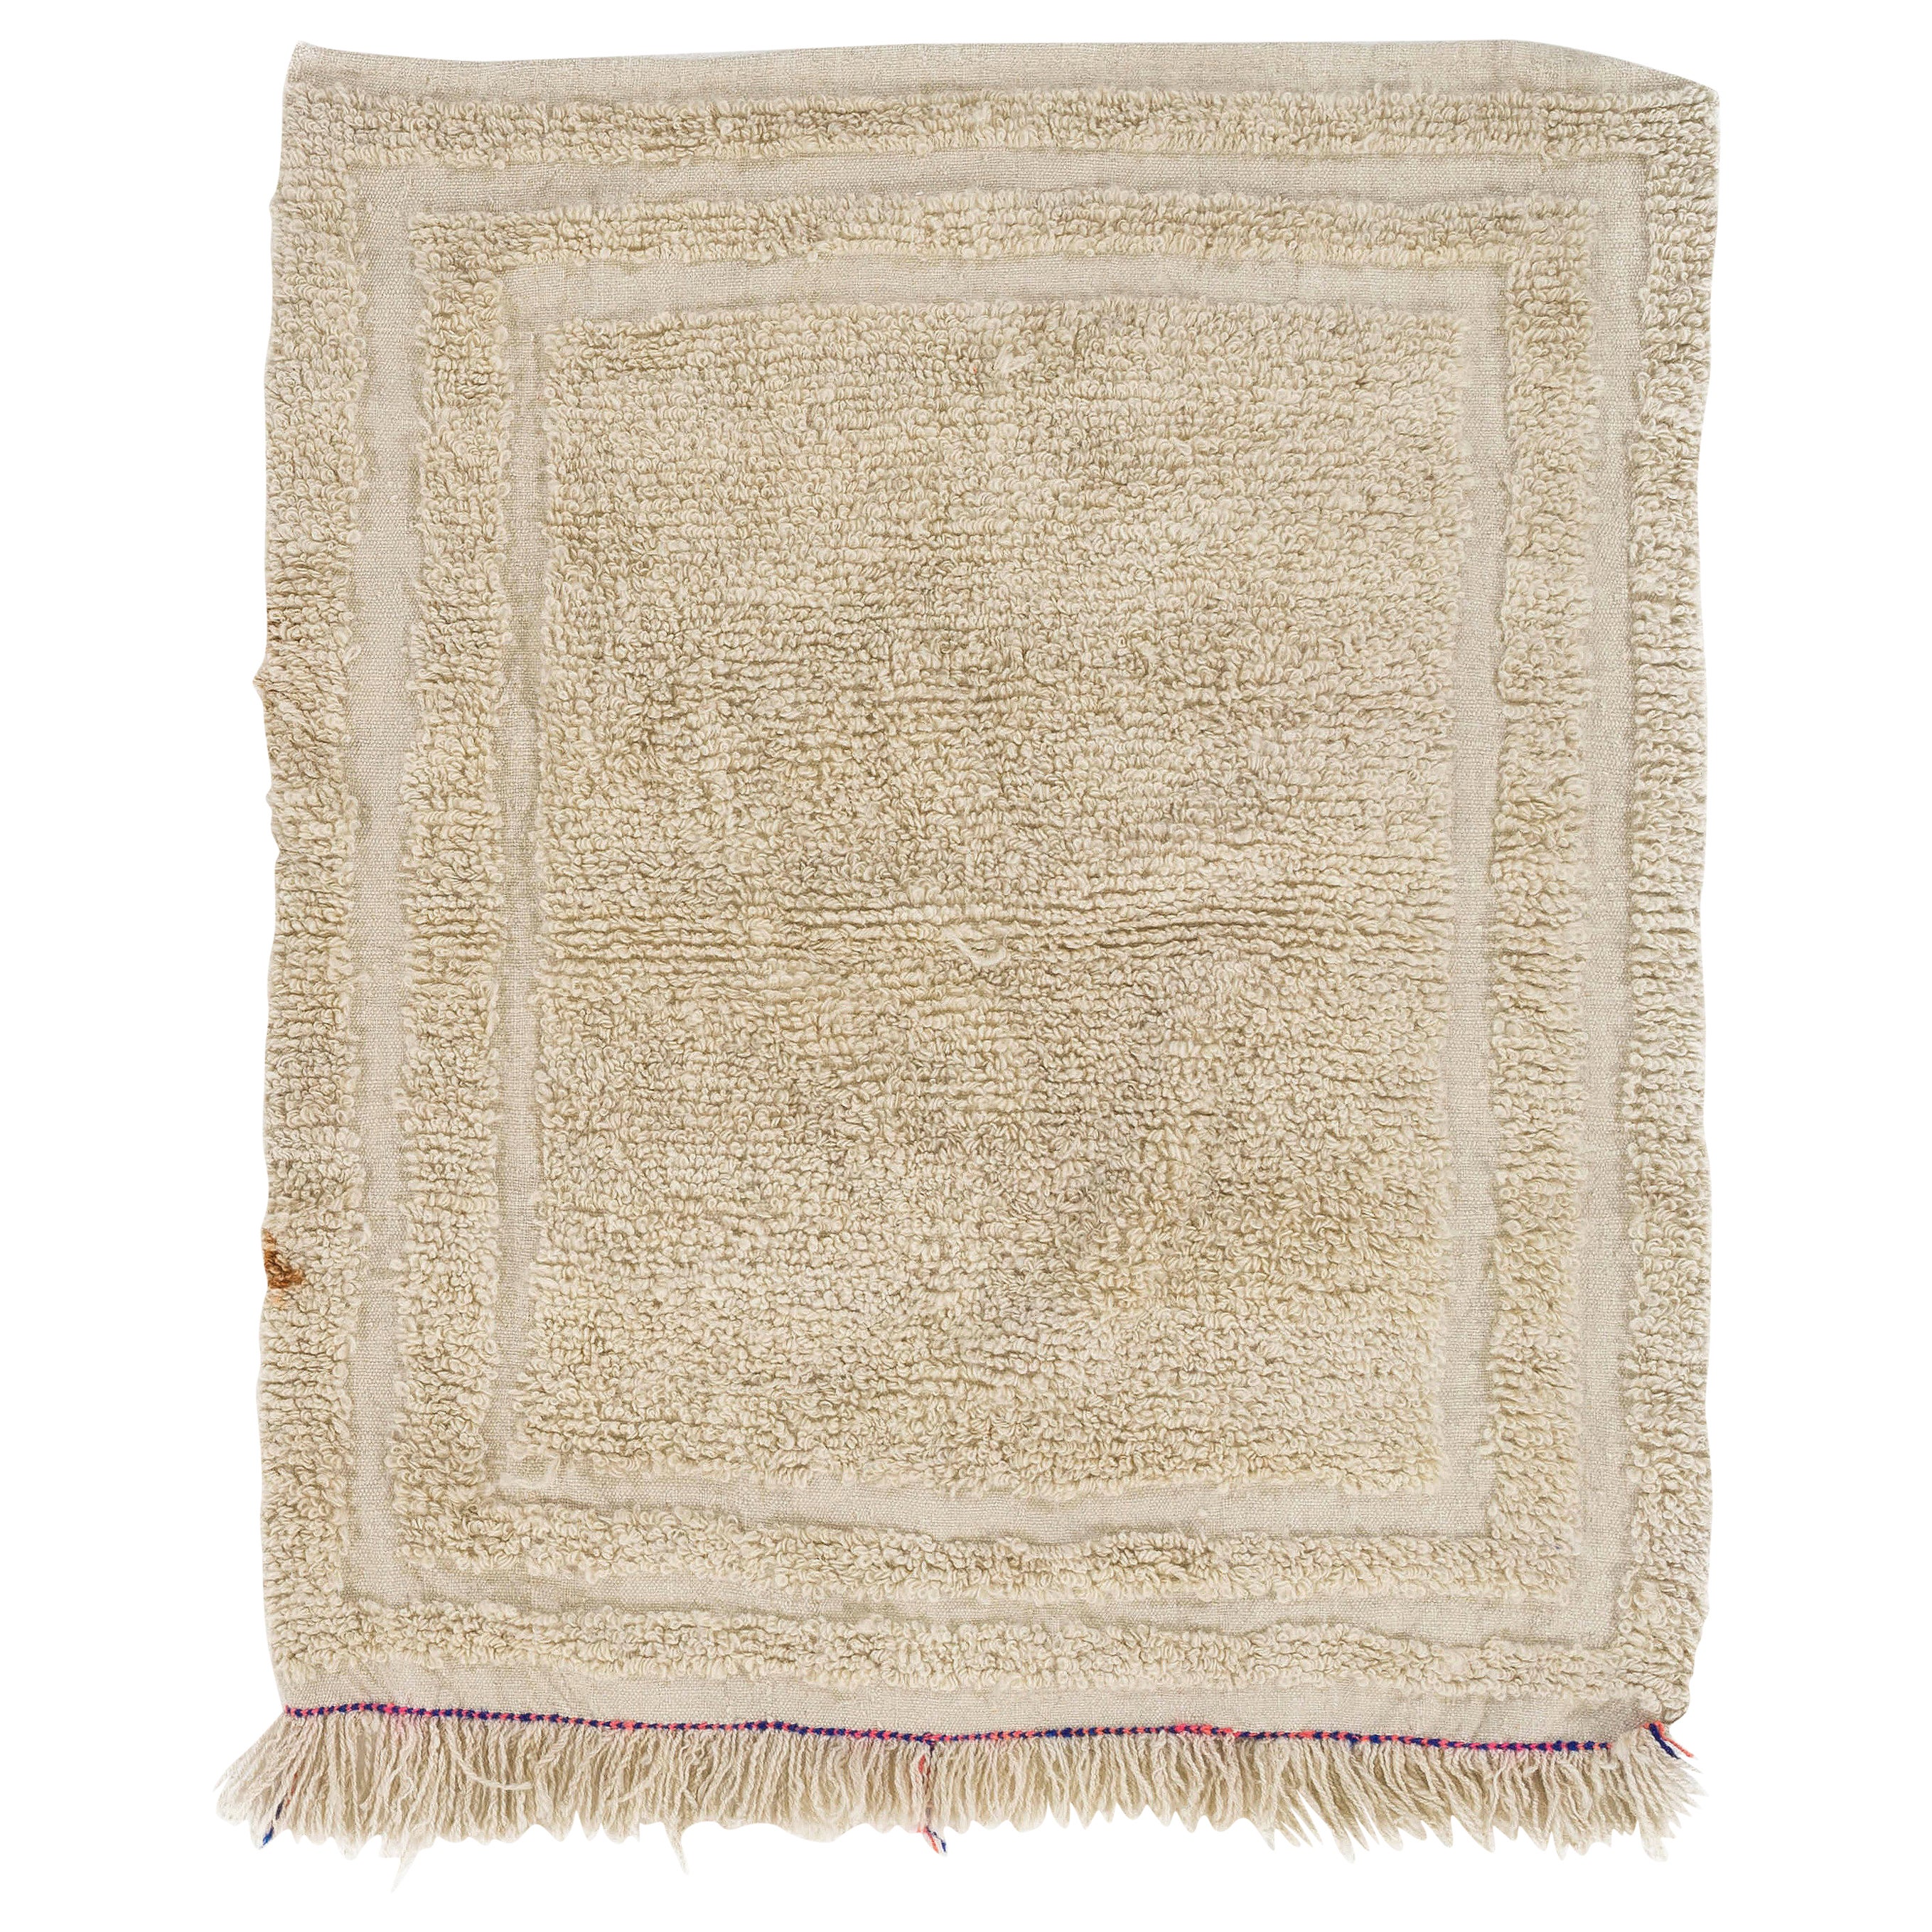 3.3x3.5 Ft Plain Cream Handmade Turkish "Tulu" Rug Made of Natural Undyed Wool For Sale